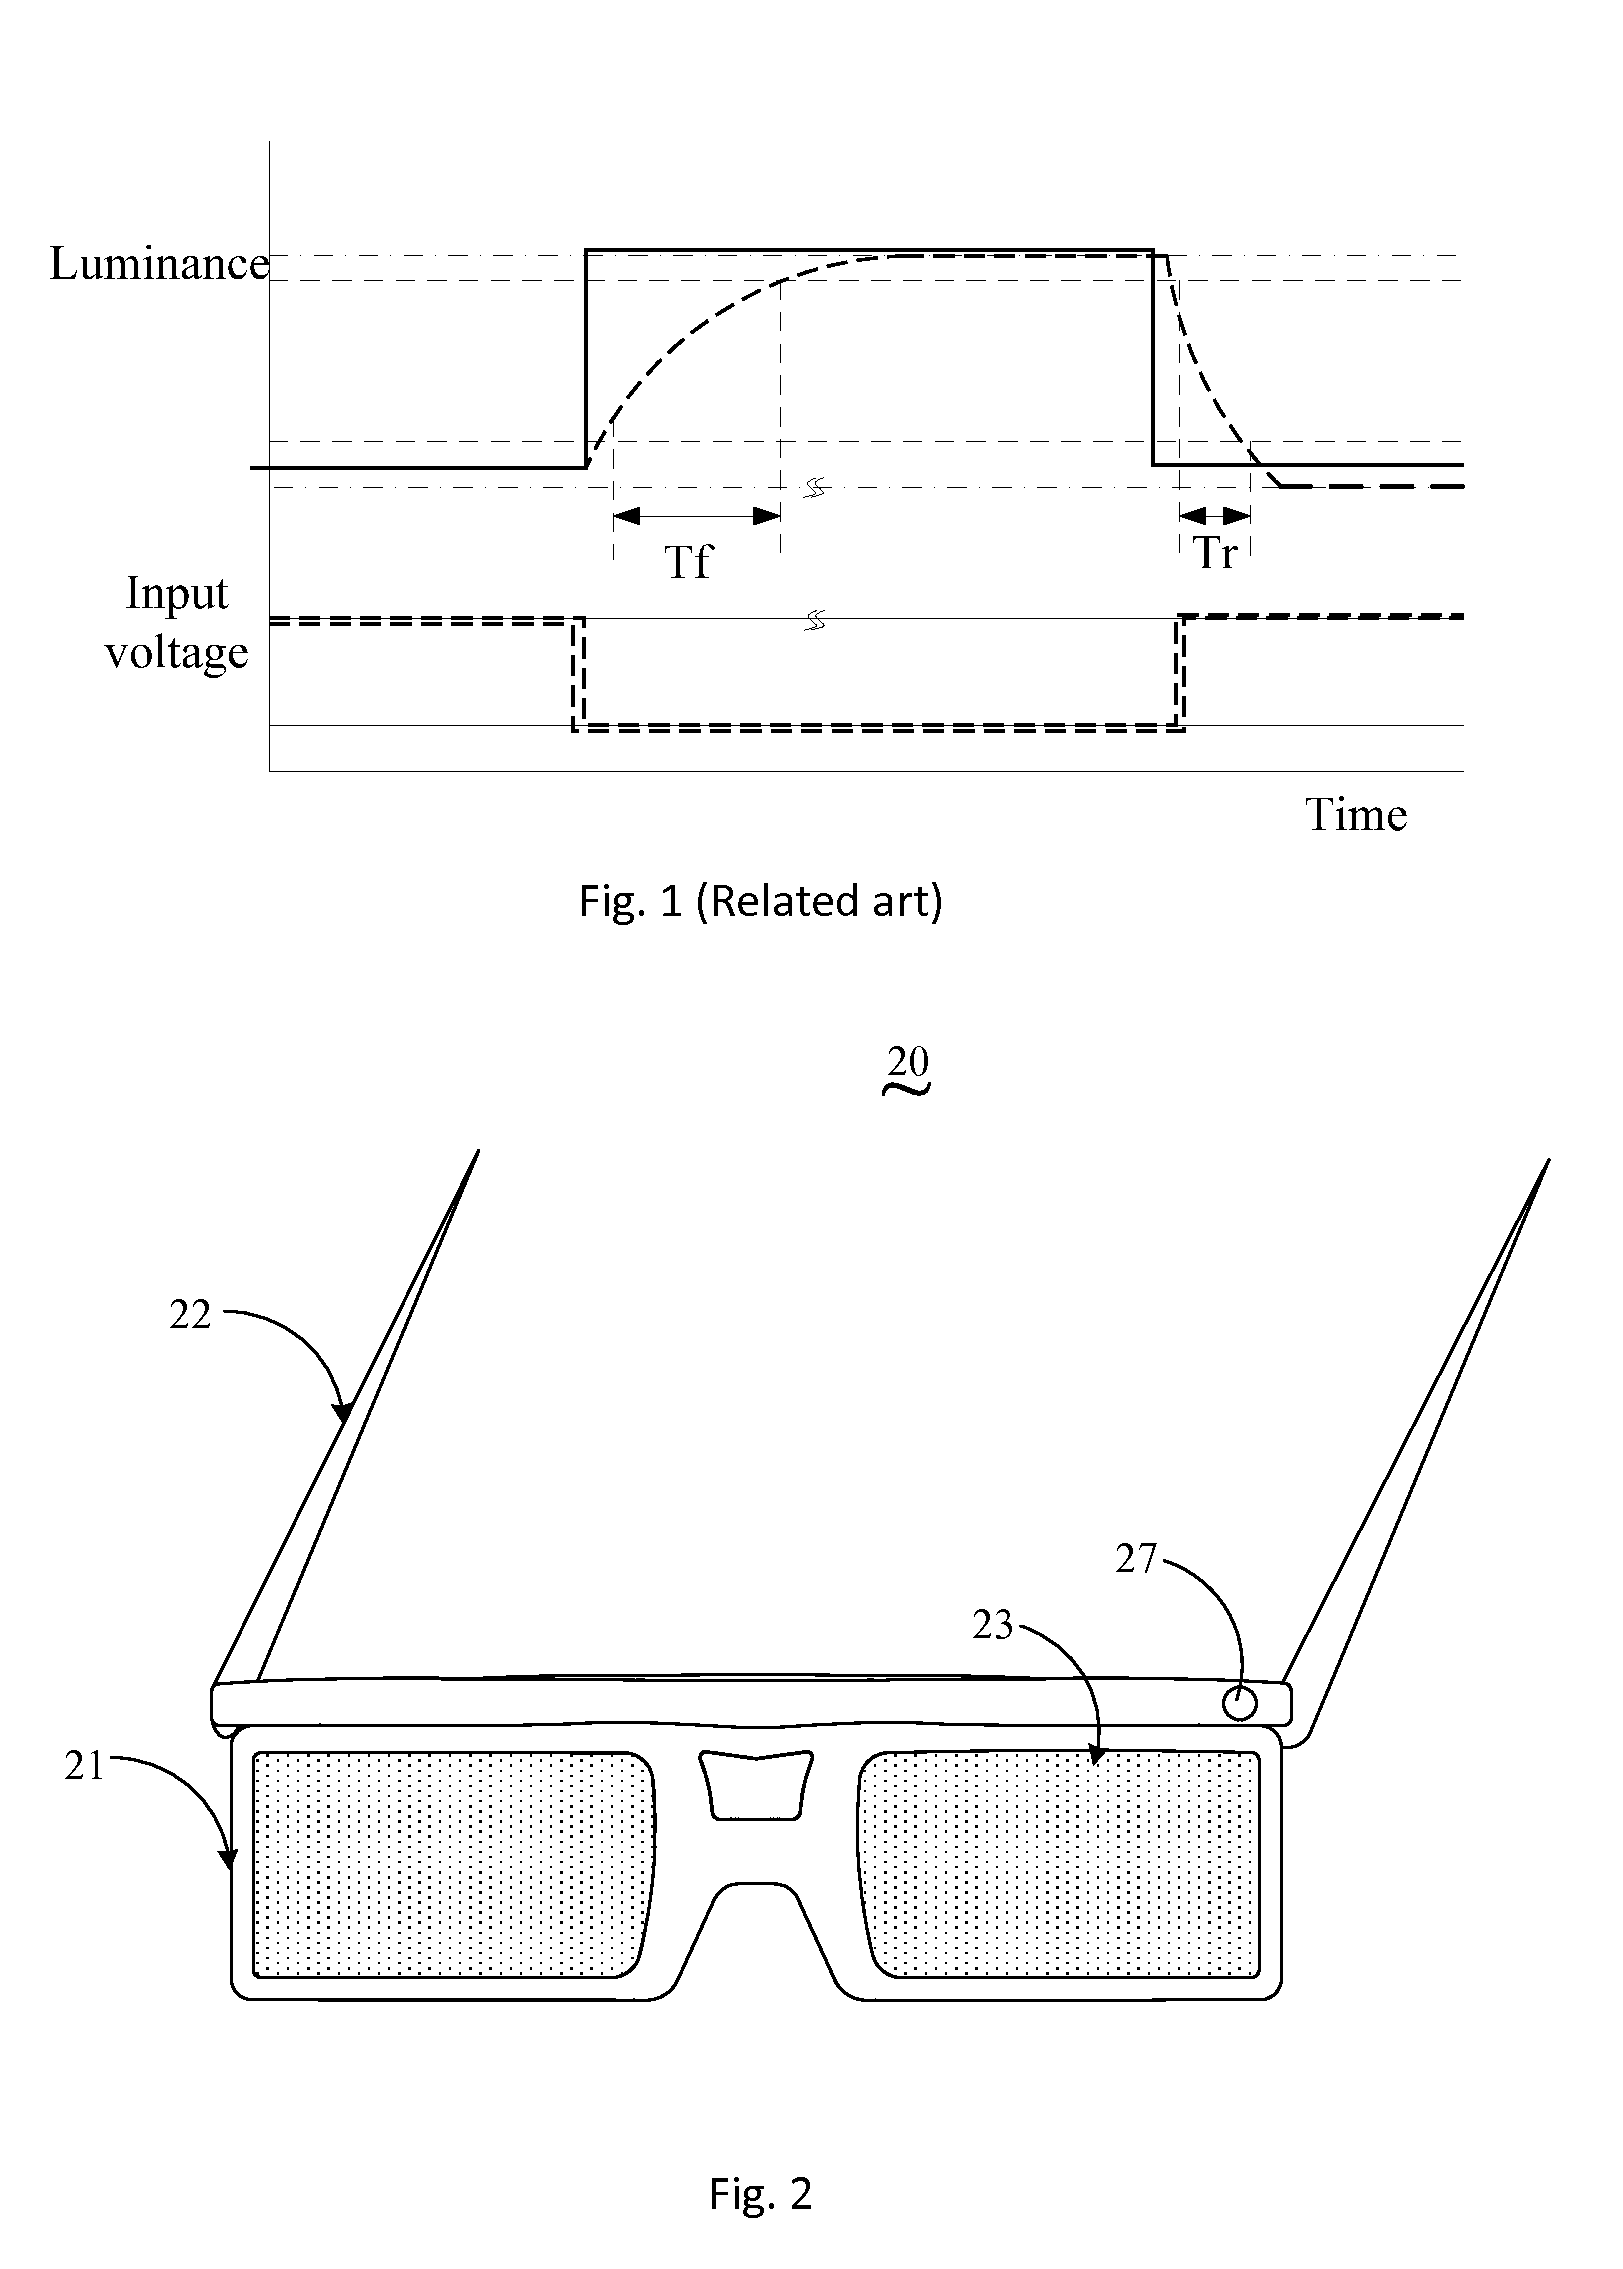 Shutter Glasses and Related 3D Display System